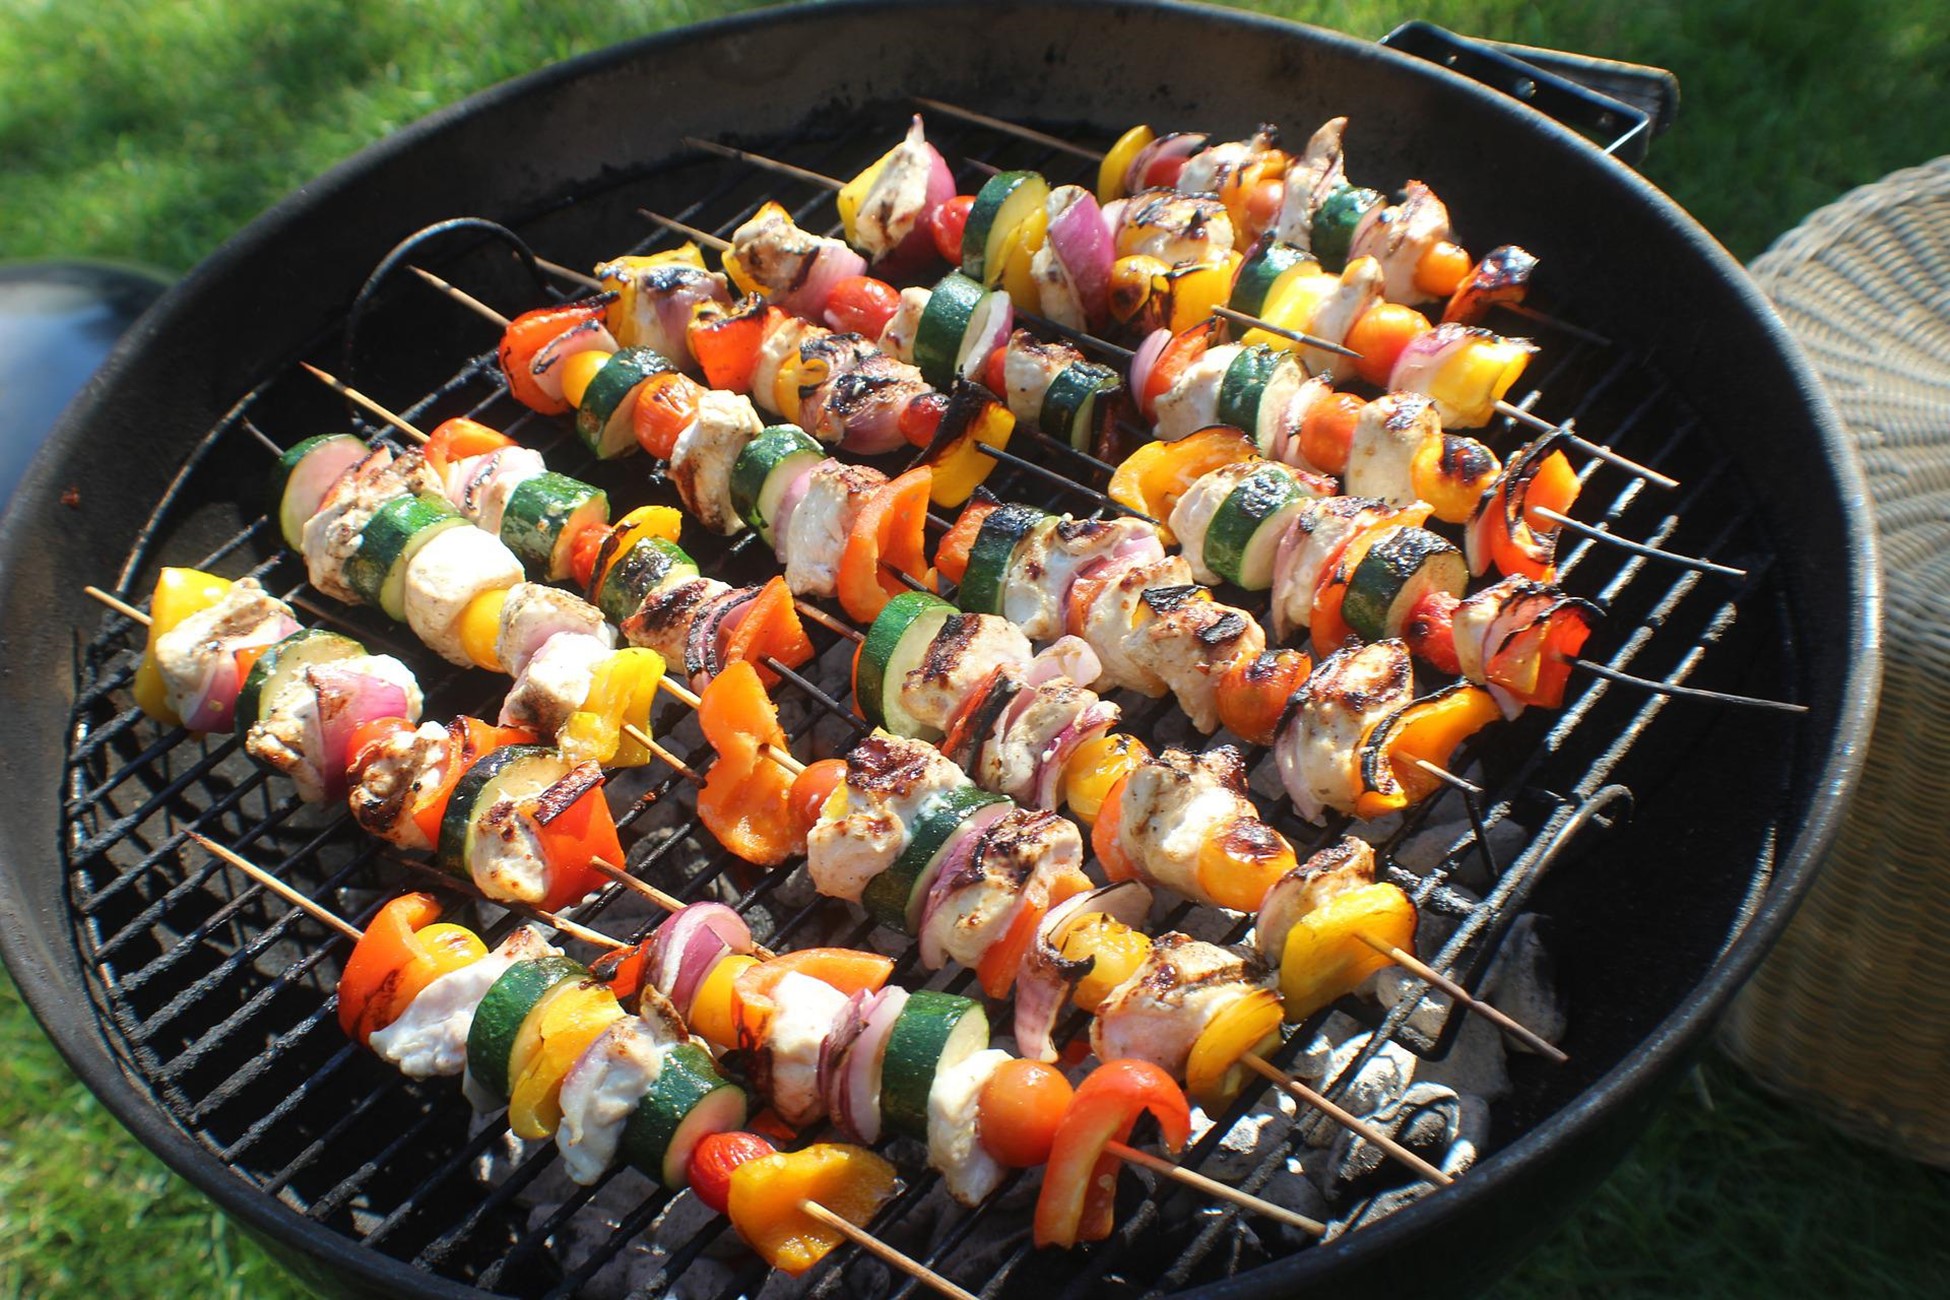 Chicken skewers on the campfire grill.